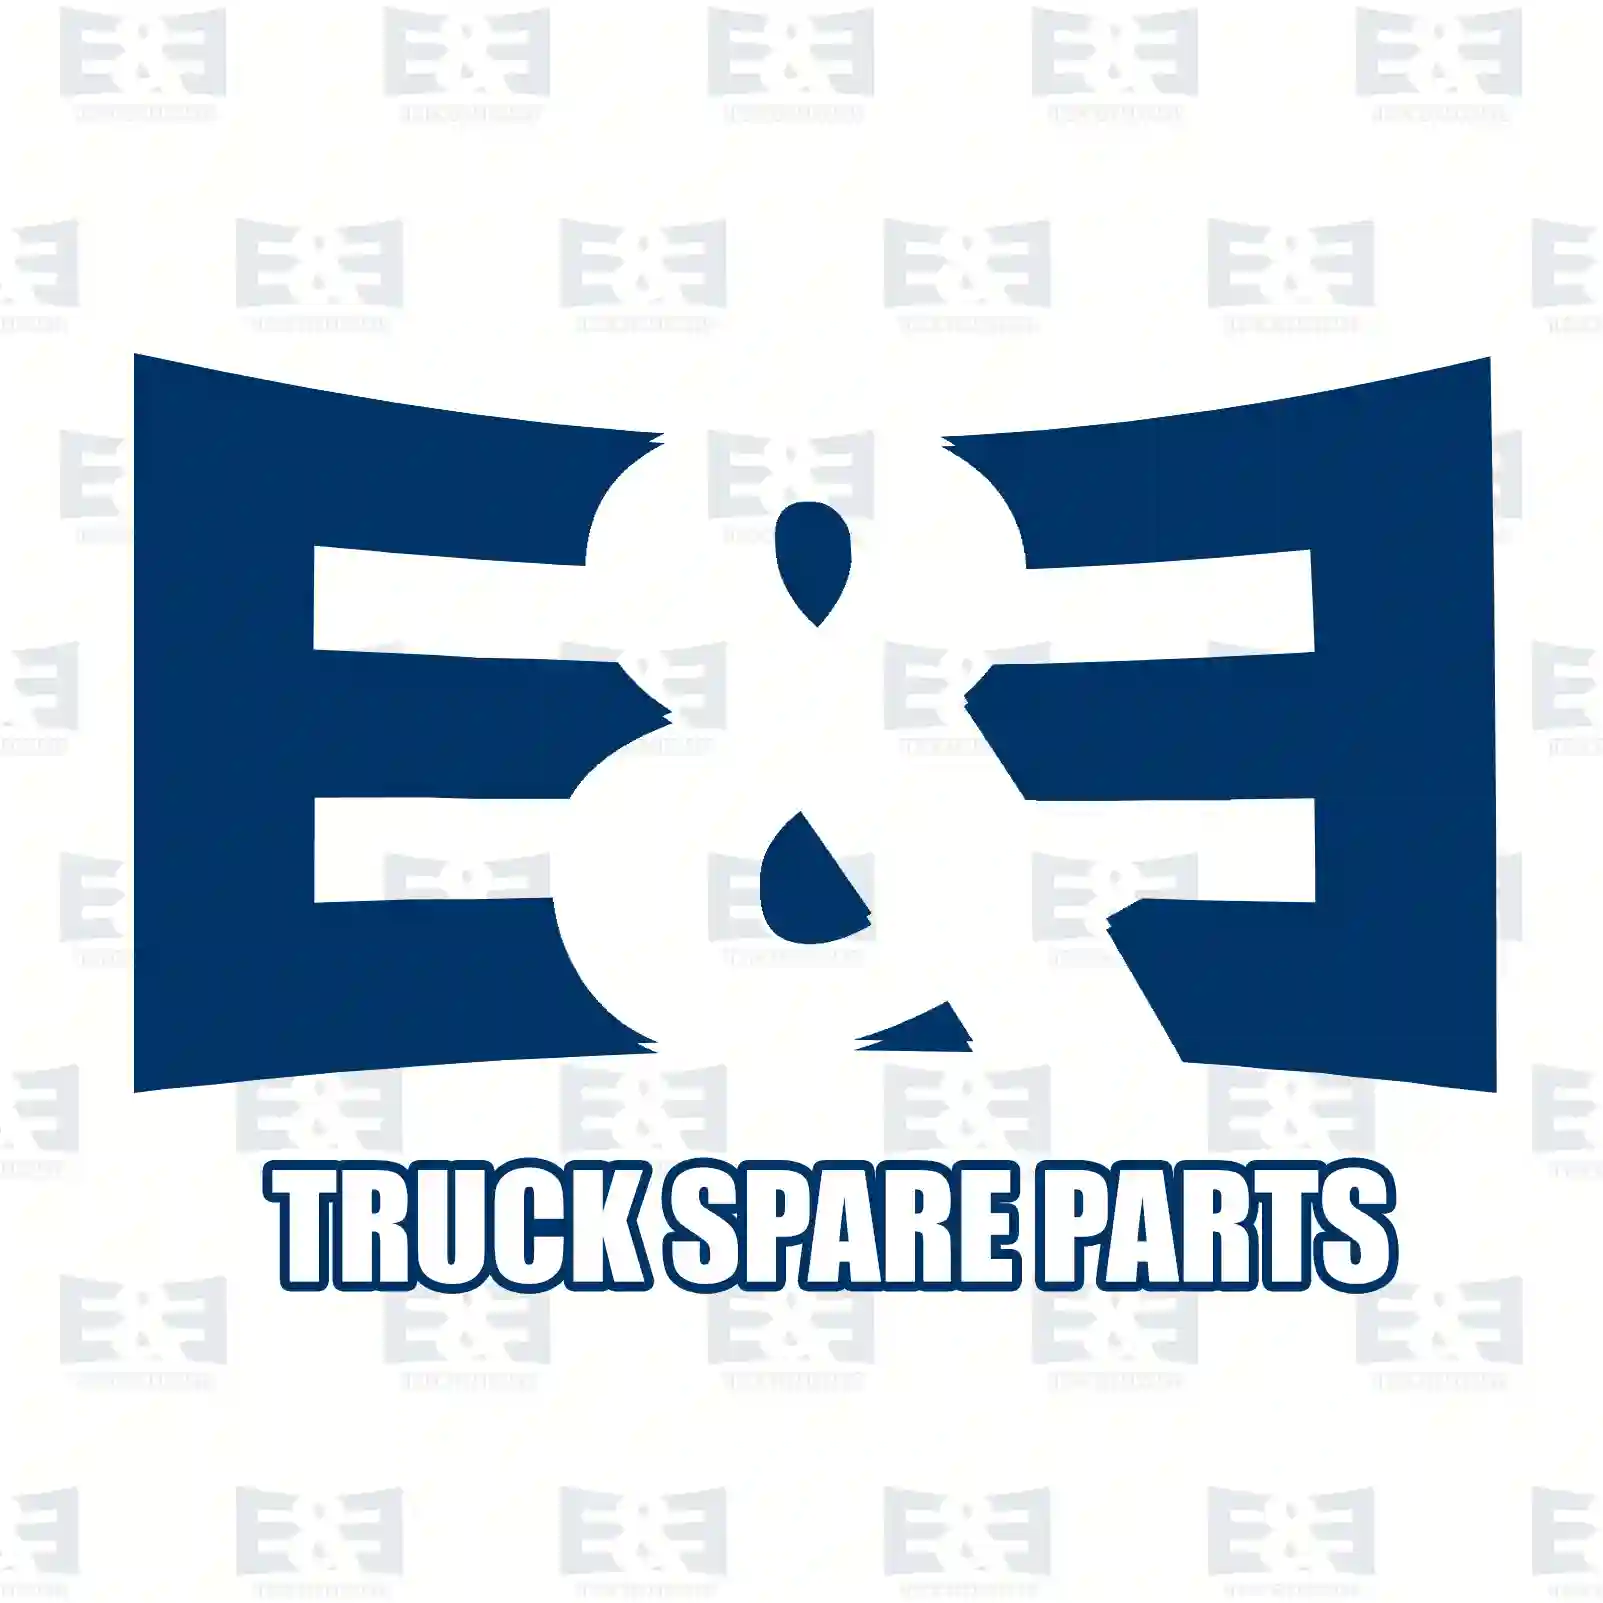  Radiator, without frame || E&E Truck Spare Parts | Truck Spare Parts, Auotomotive Spare Parts